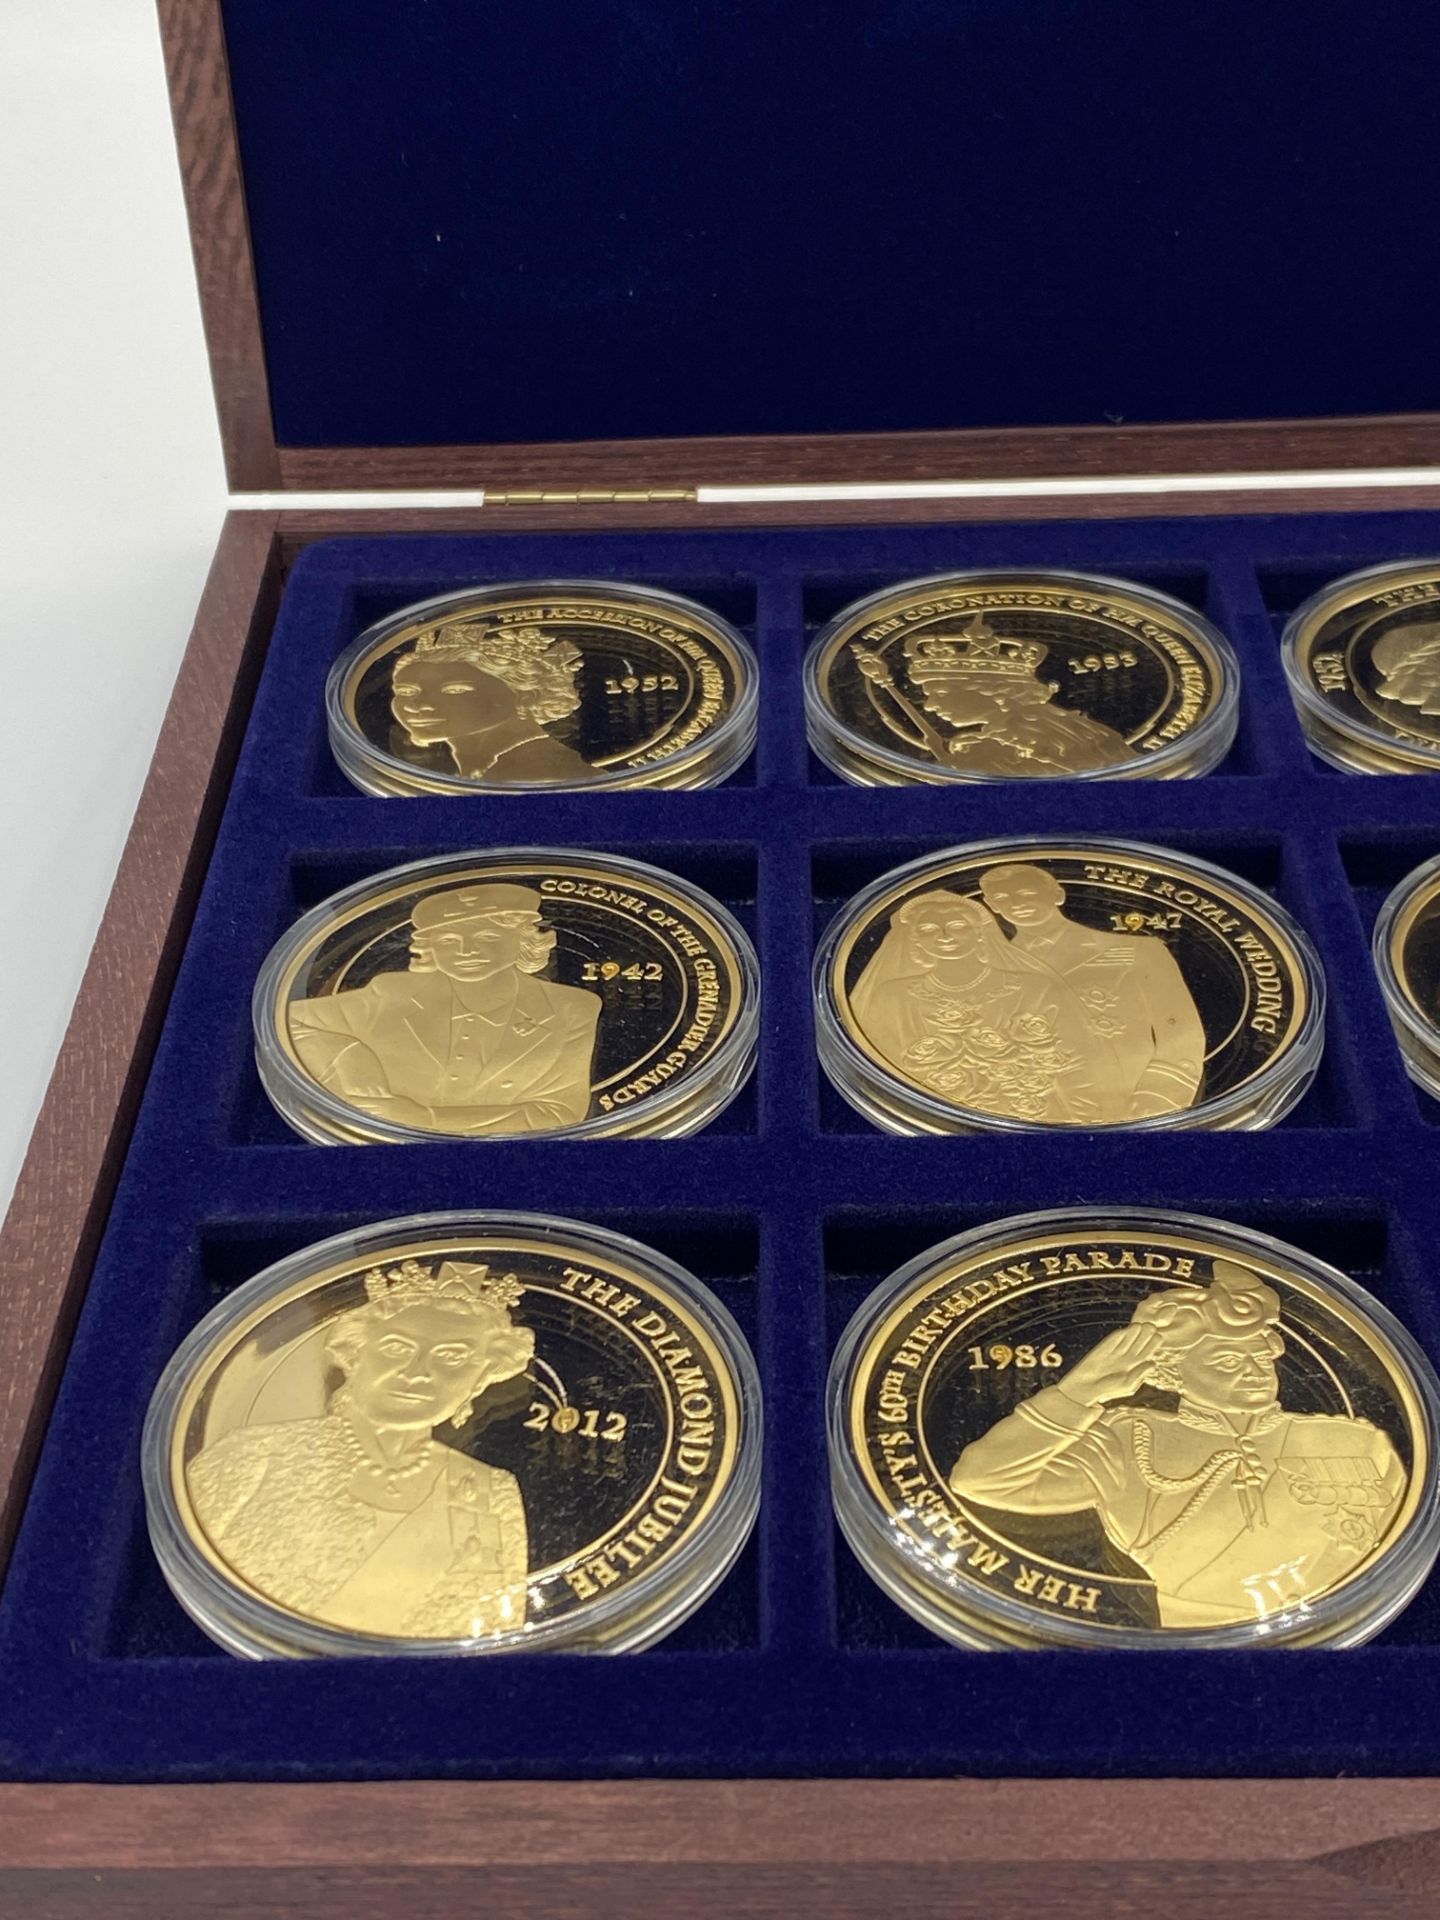 Twelve gold plated Portraits of the Queen Diamond Jubilee coins in presentation box - Image 3 of 6